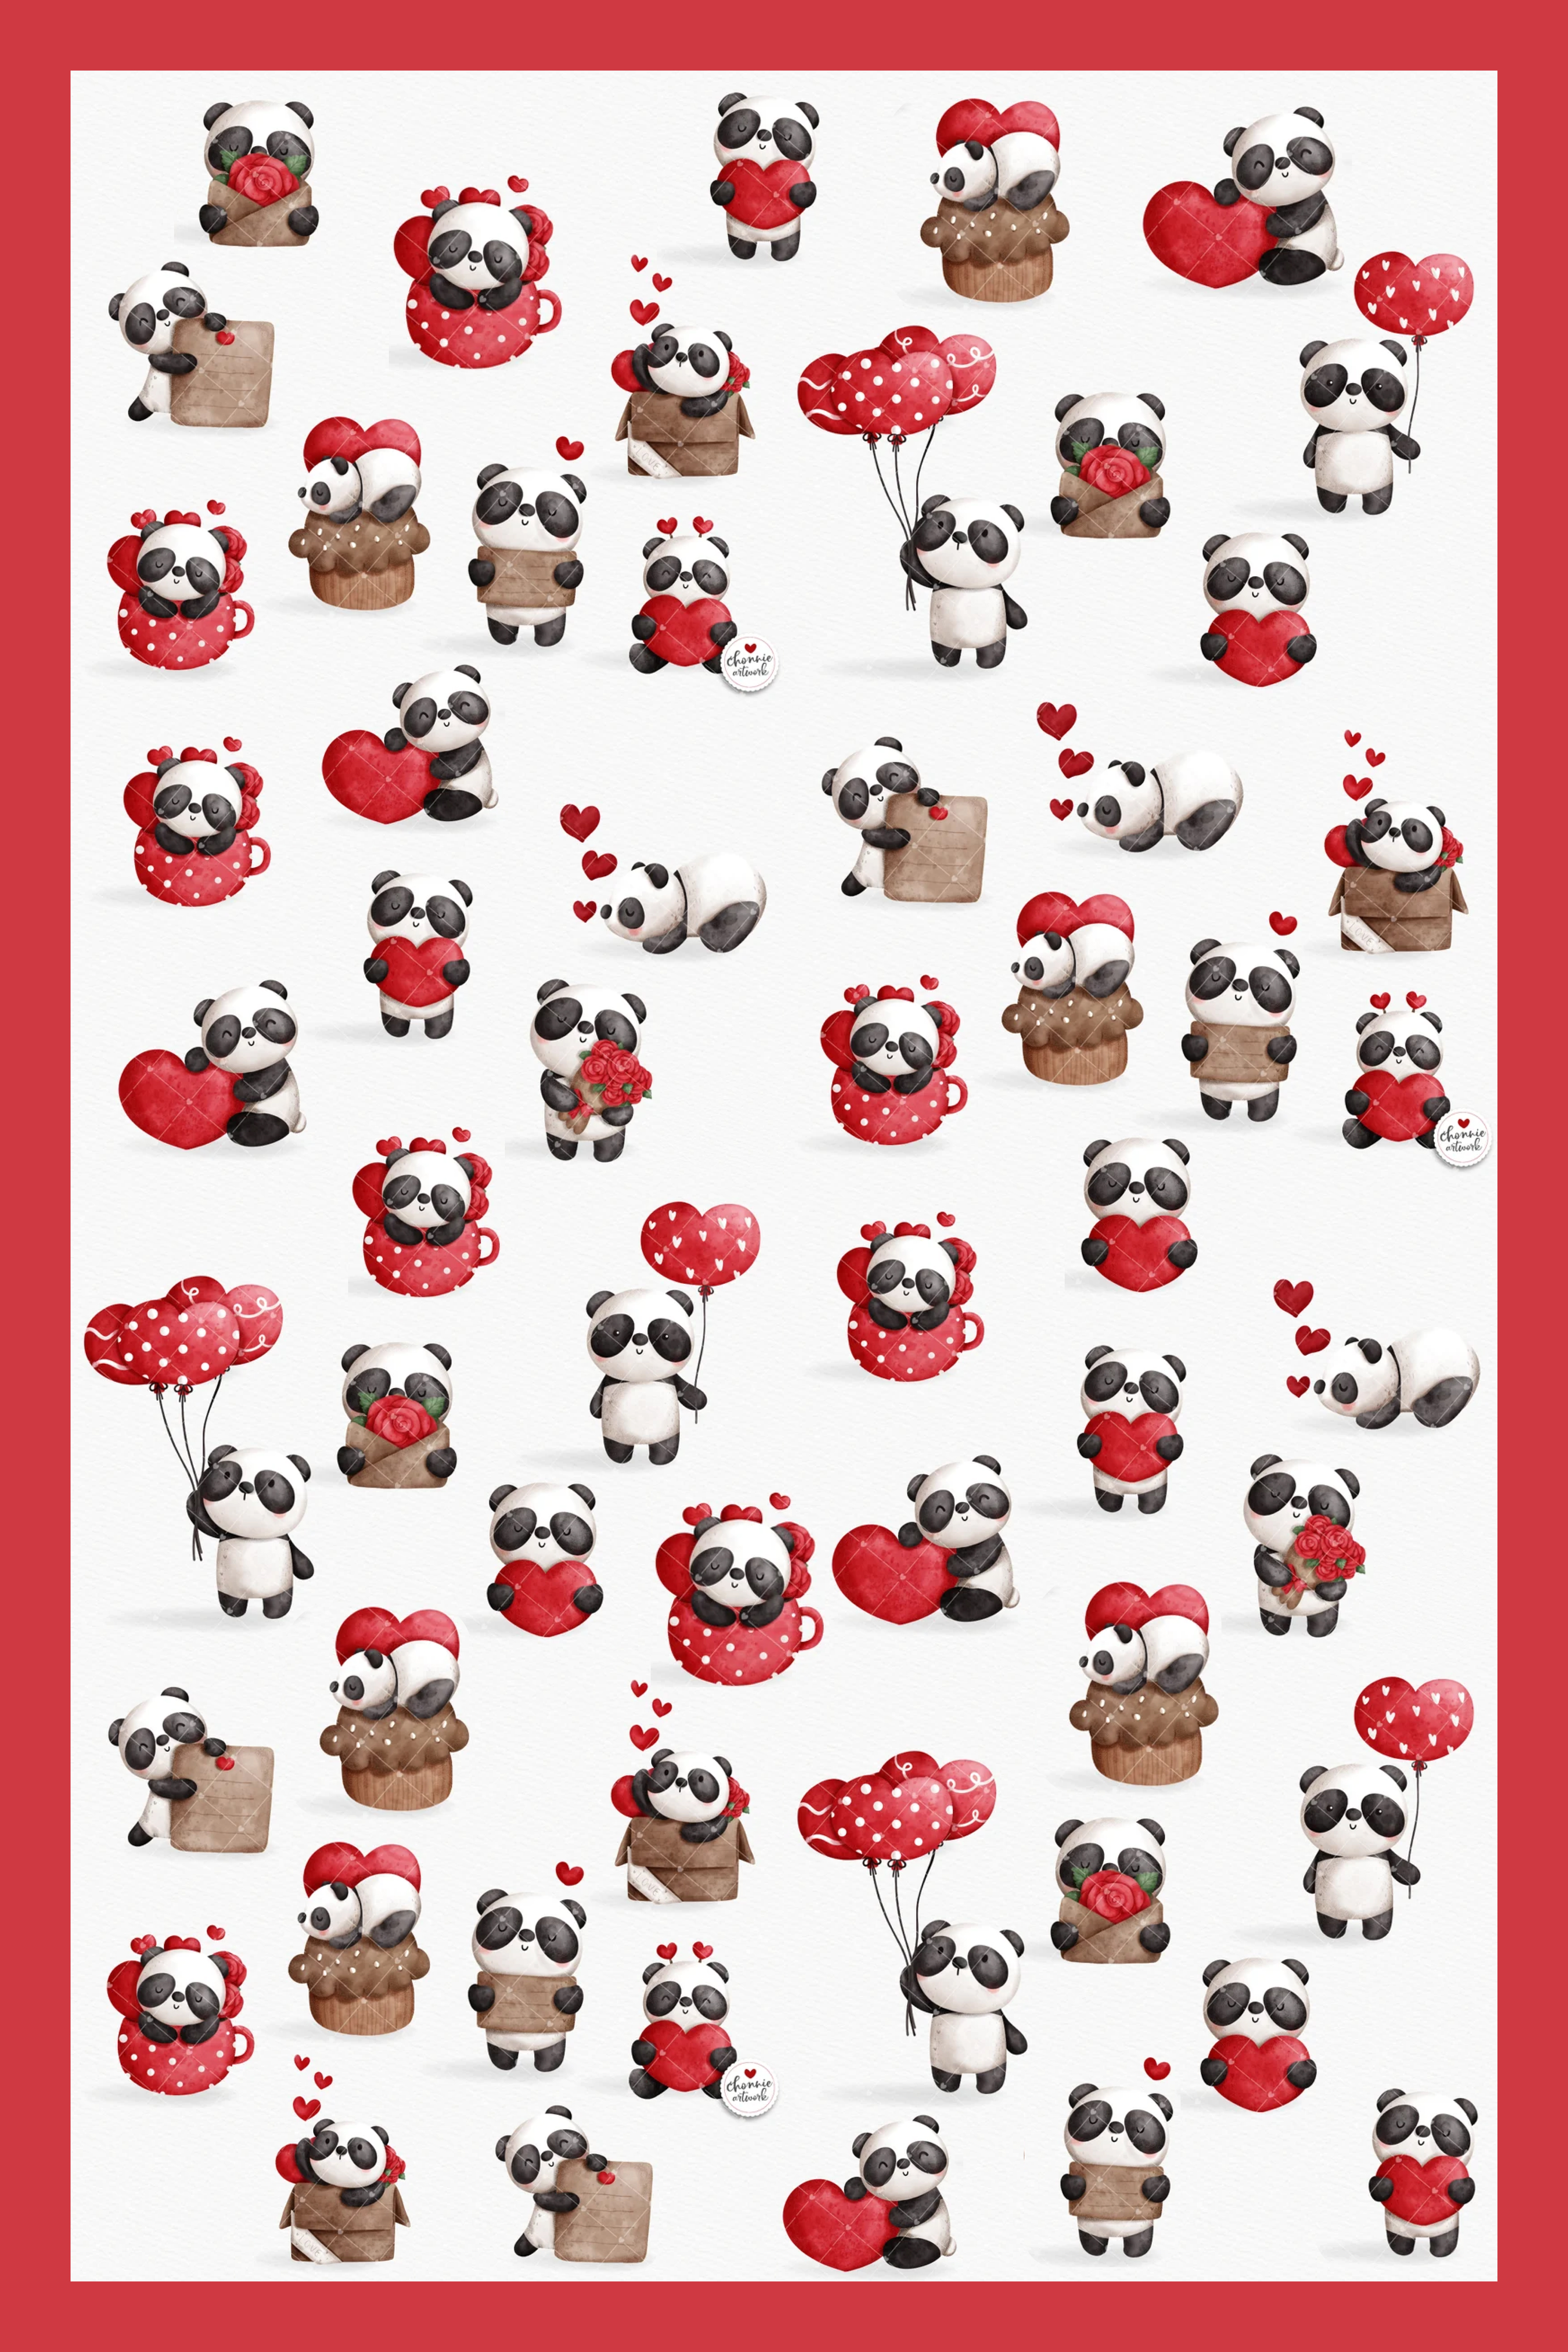 Collage of pandas with red hearts and balloons.